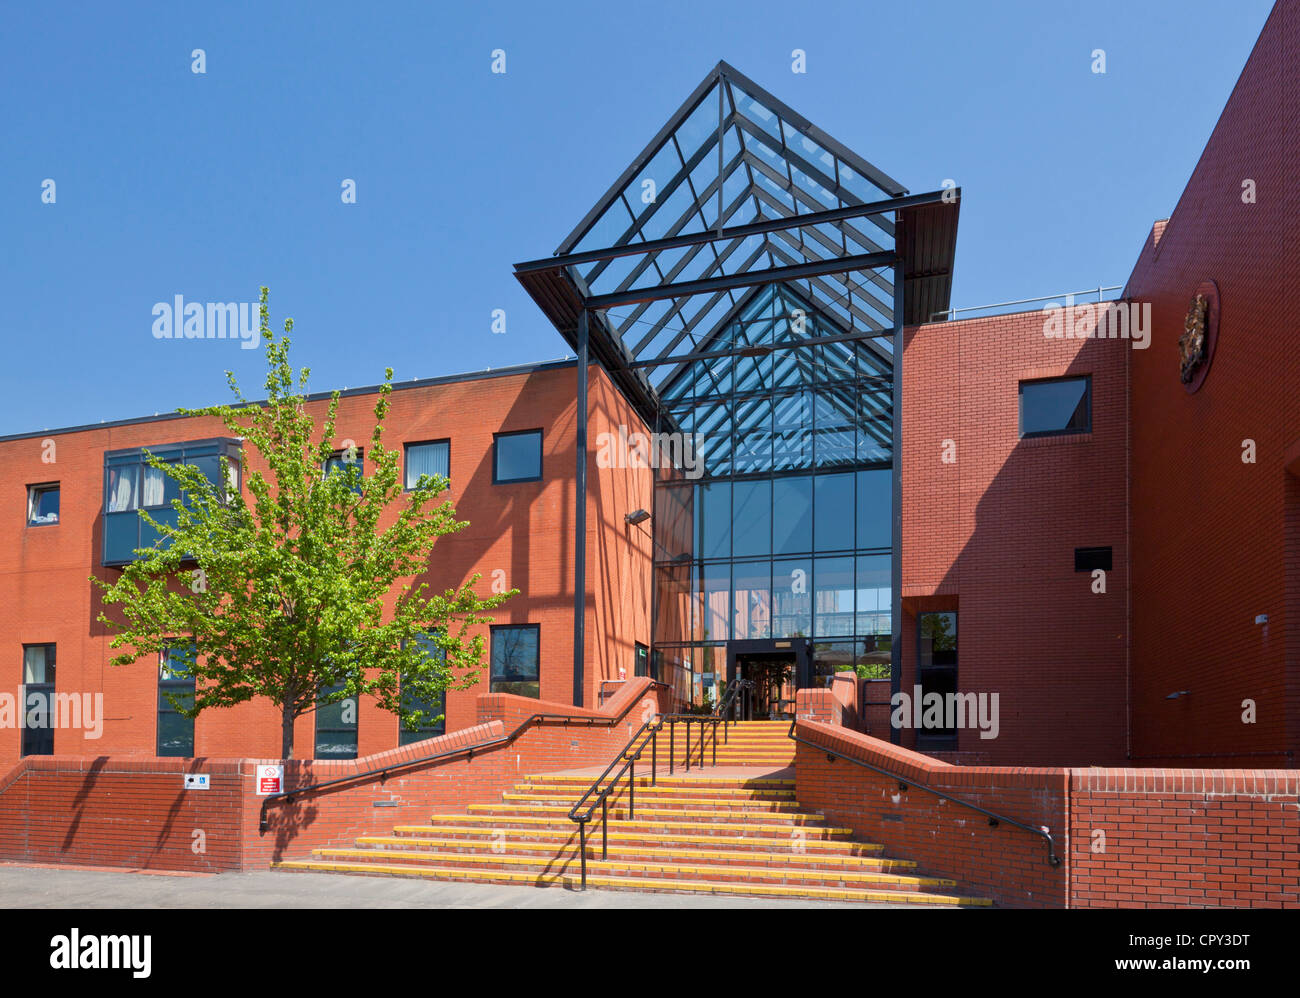 Leicester Crown Court Leicestershire East Midlands England UK GB EU Europa Stockfoto